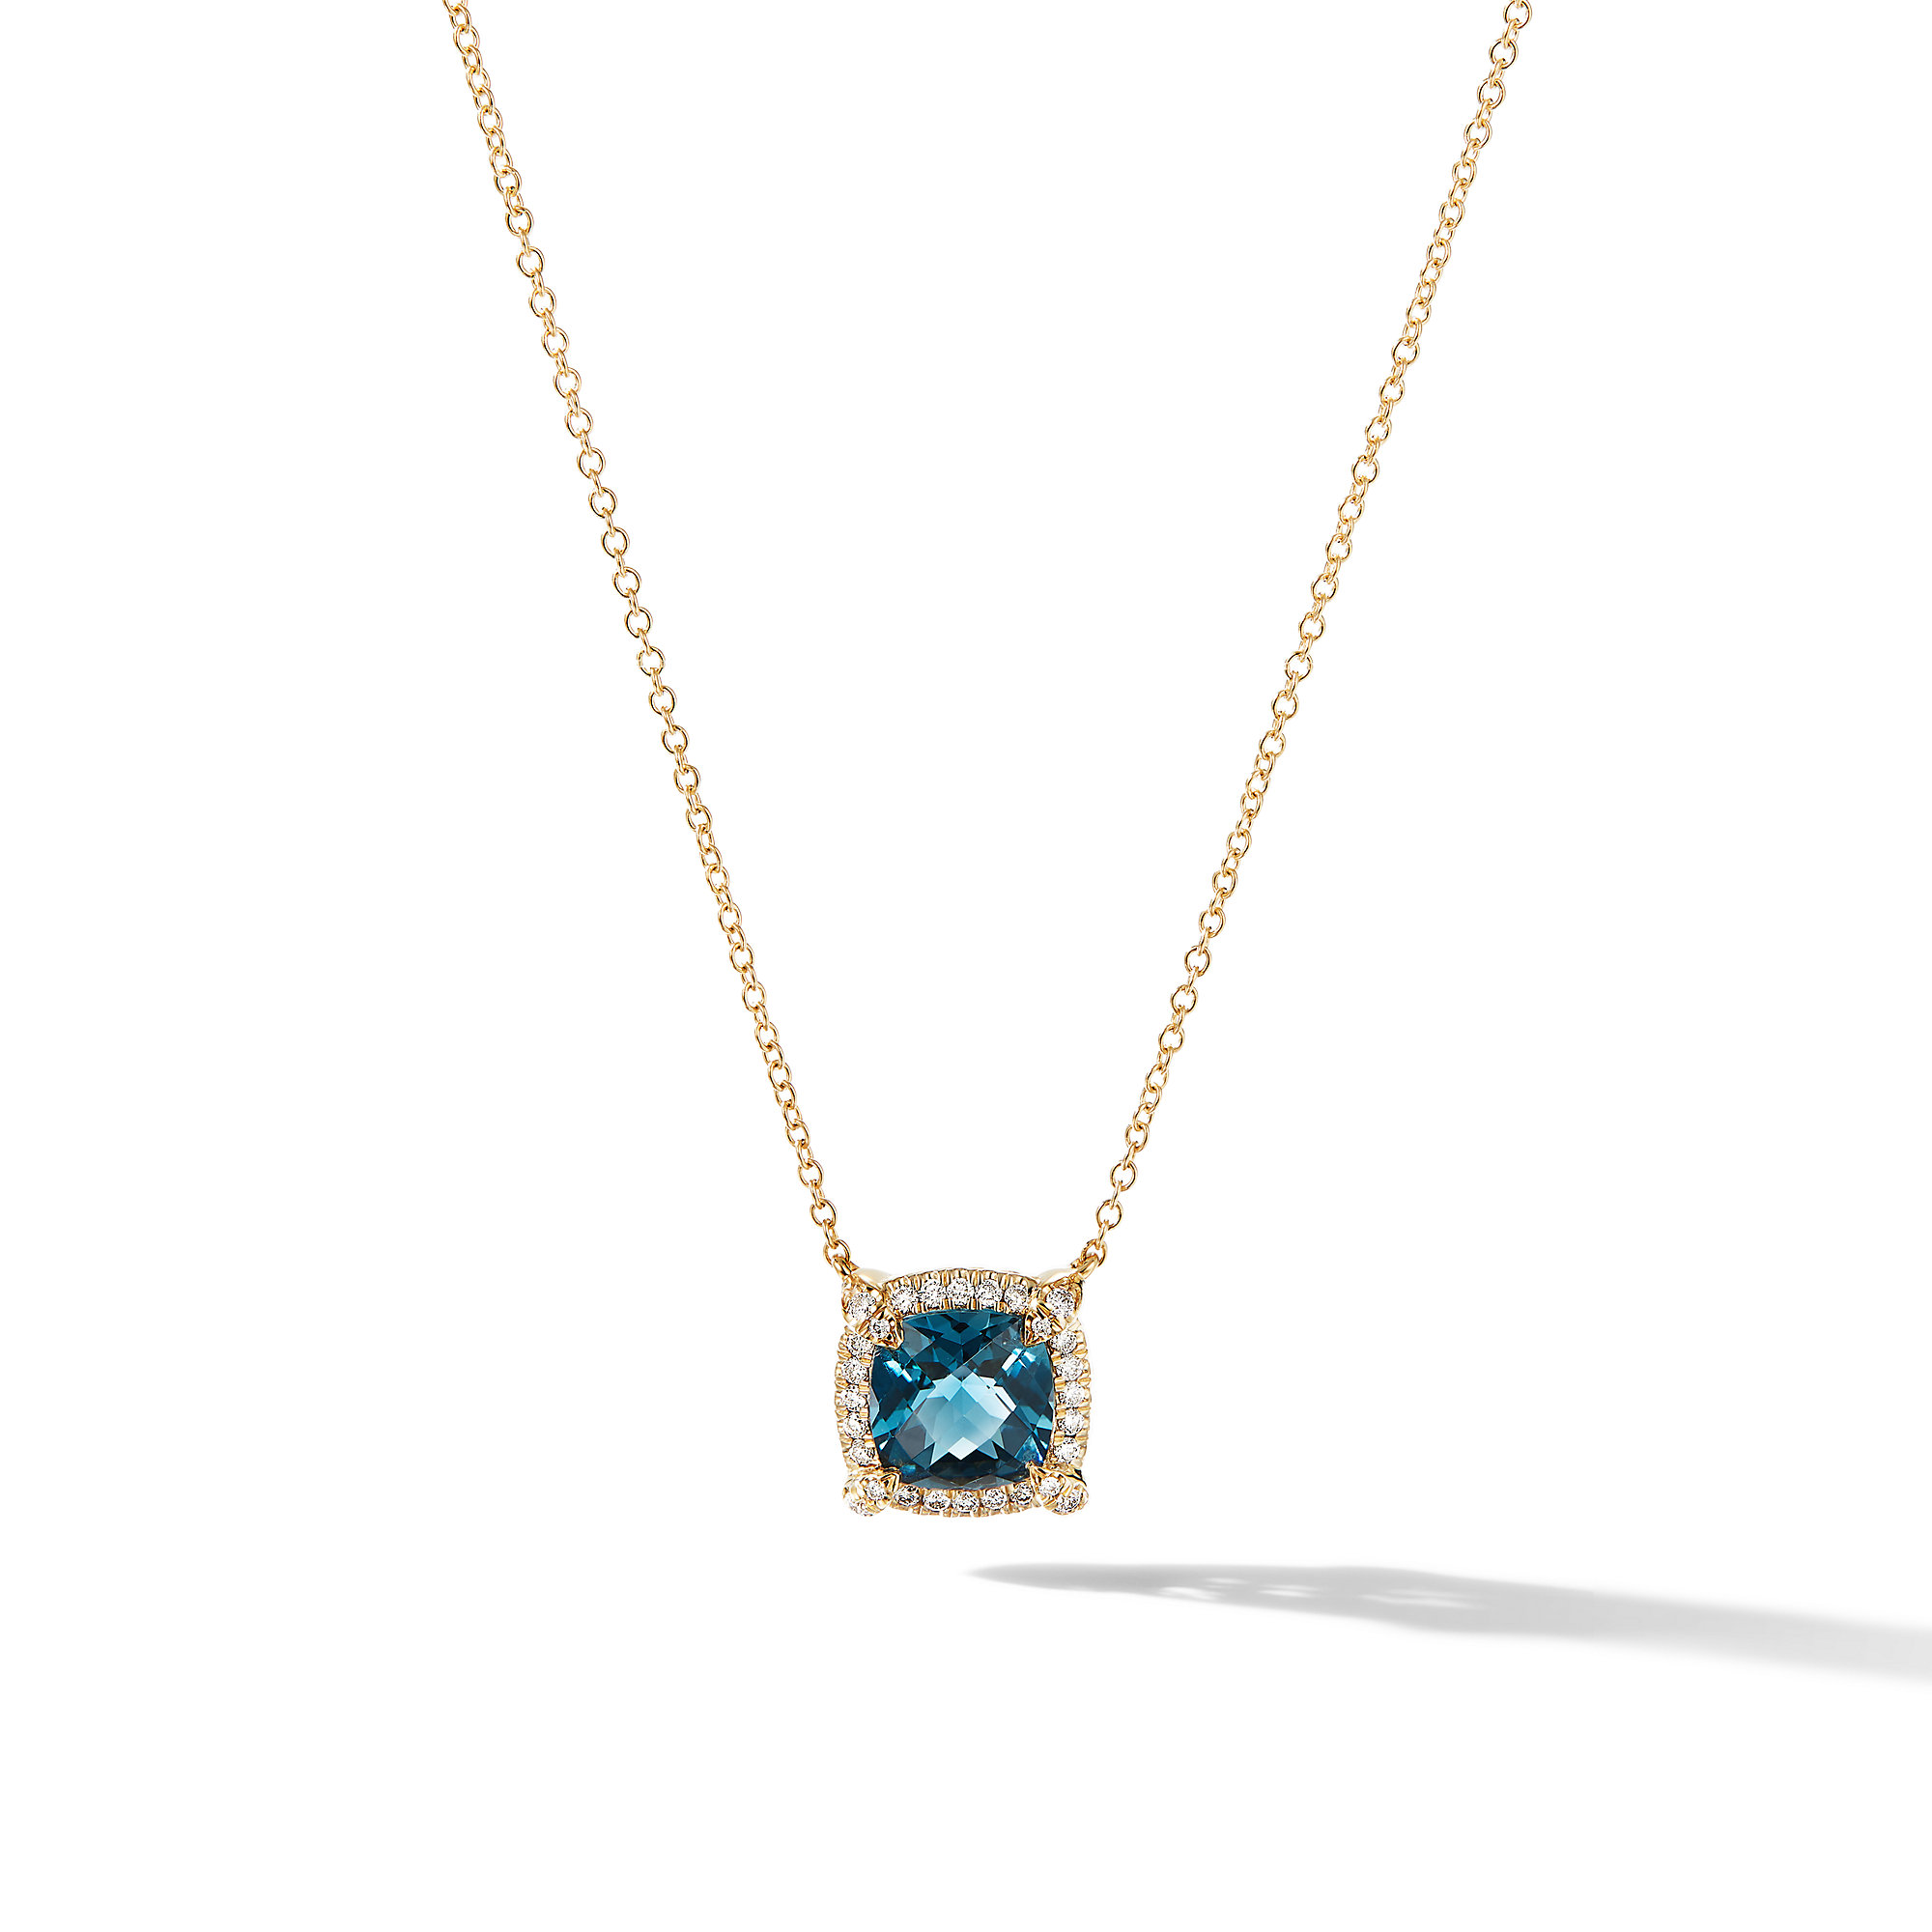 Petite Chatelaine® Pave Bezel Pendant Necklace in 18K Yellow Gold with Hampton Blue Topaz